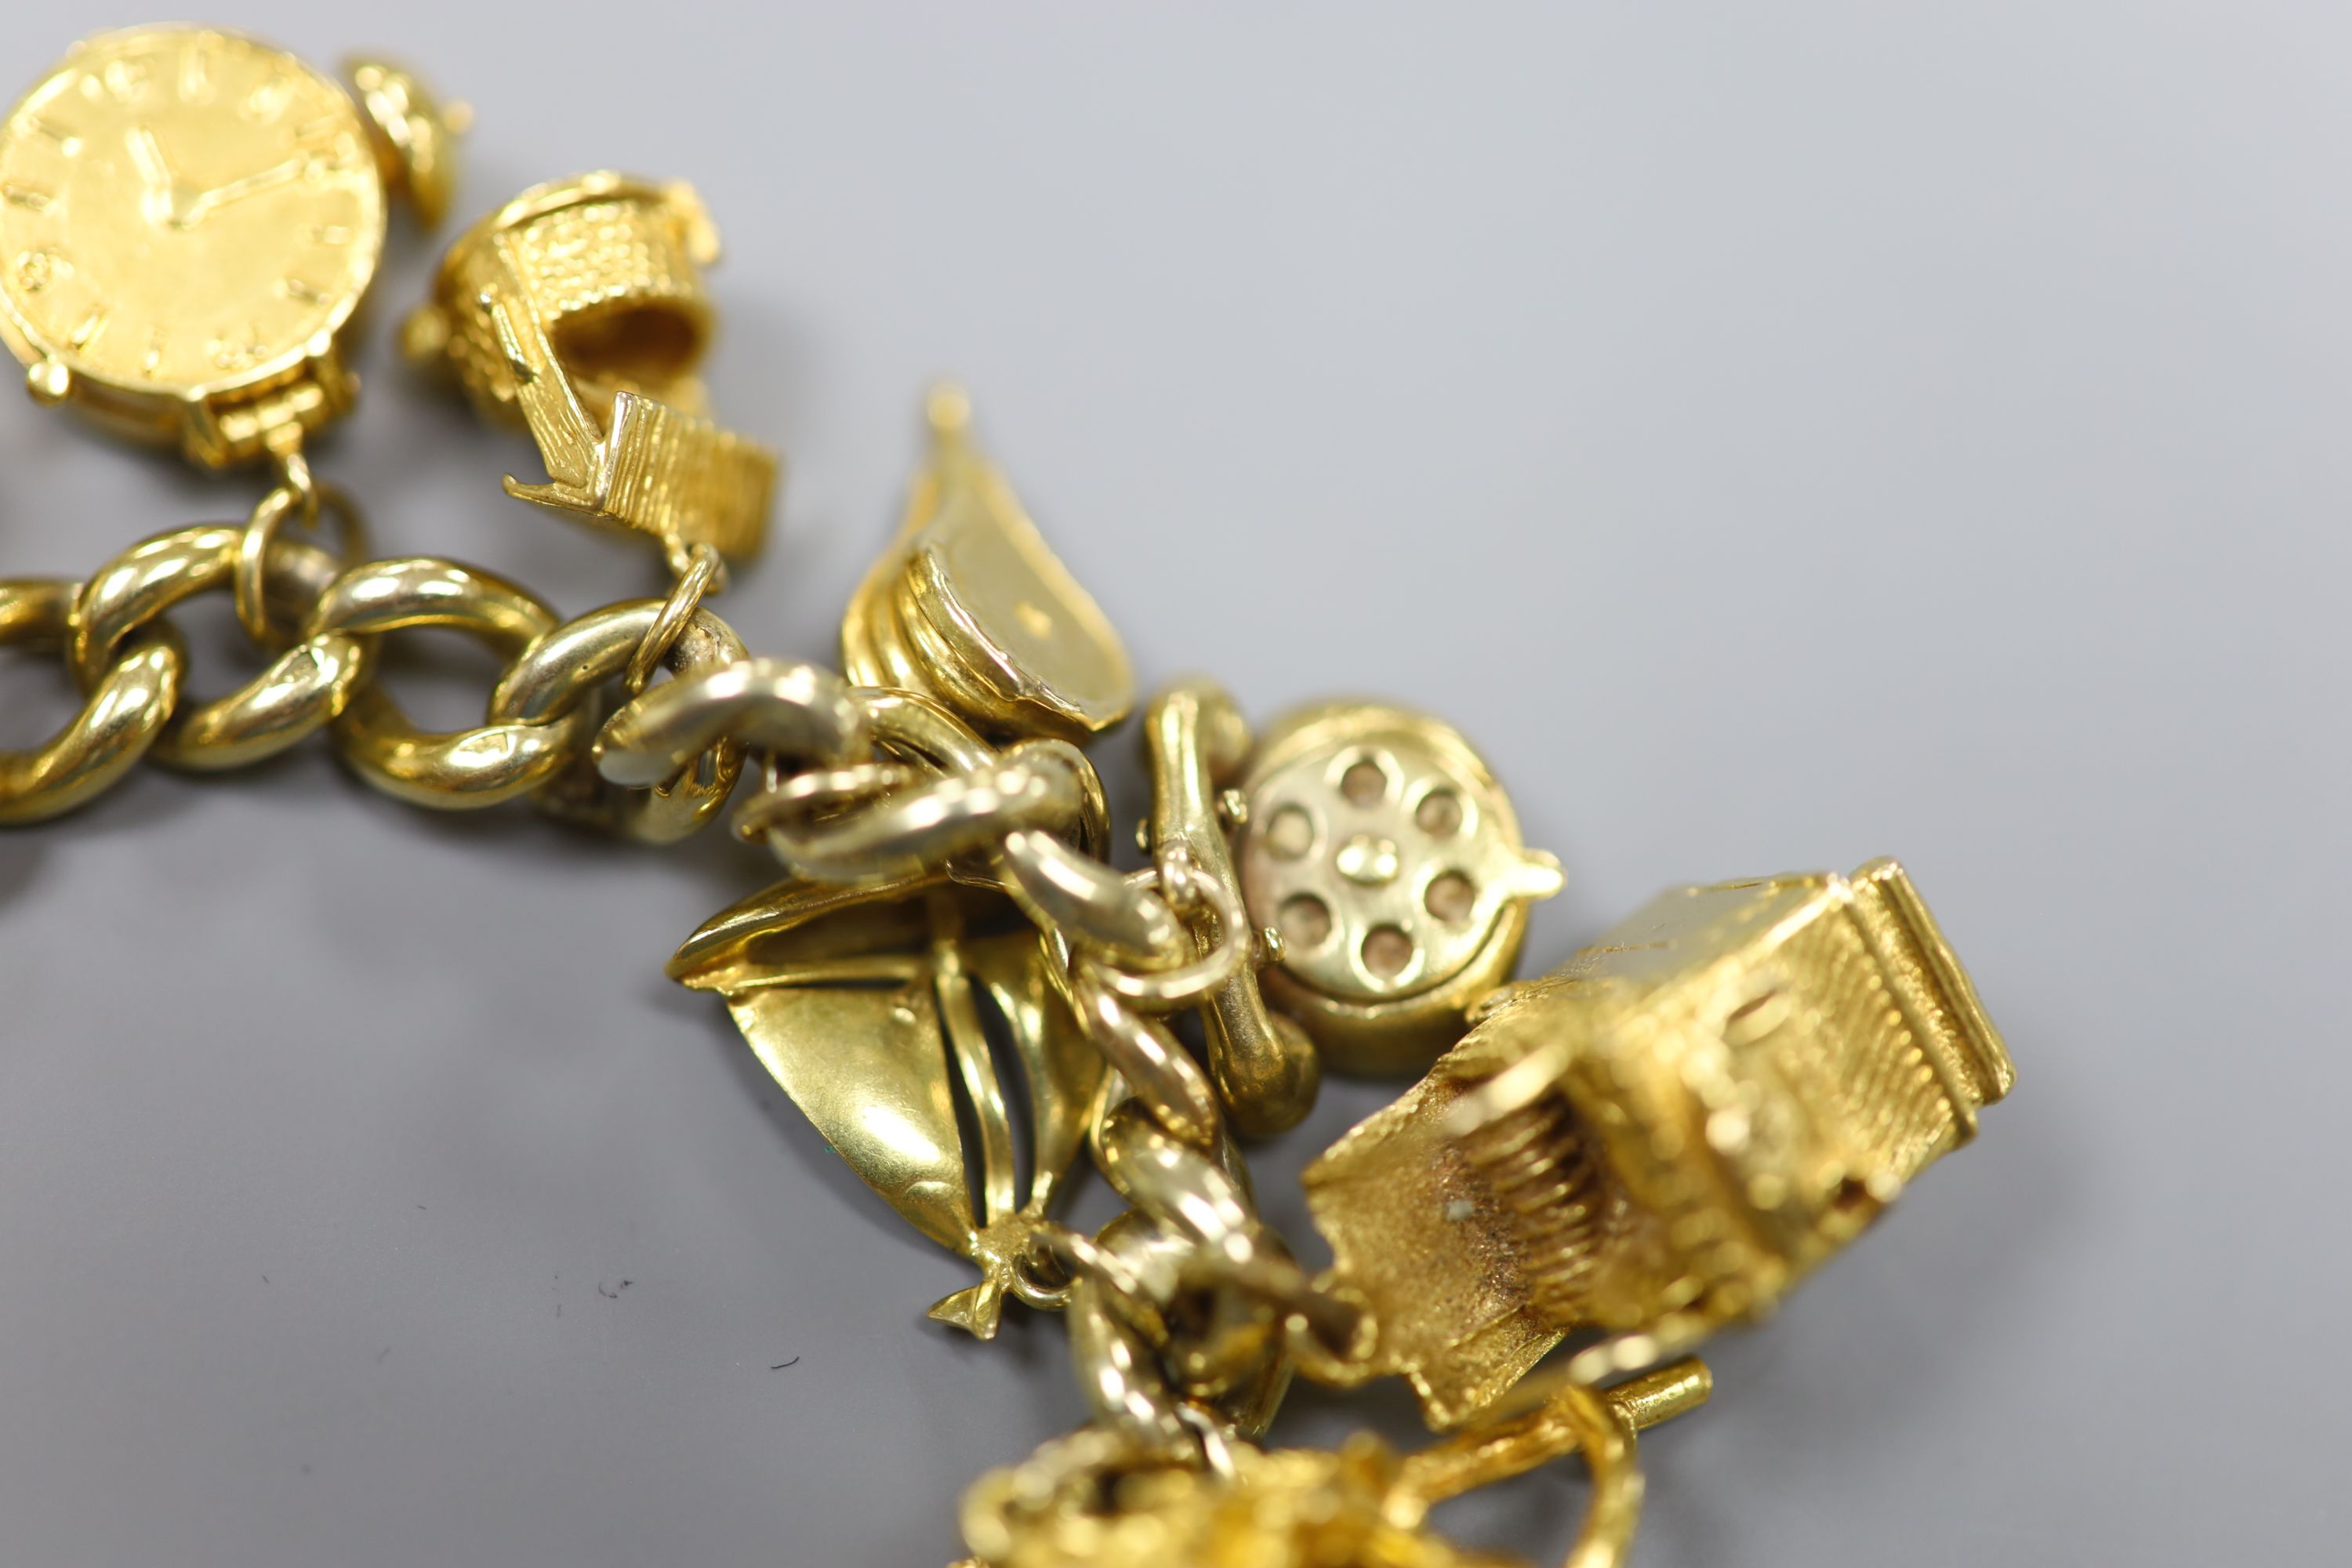 A 9ct curb link charm bracelet hung with twenty one assorted mainly 9ct gold charms